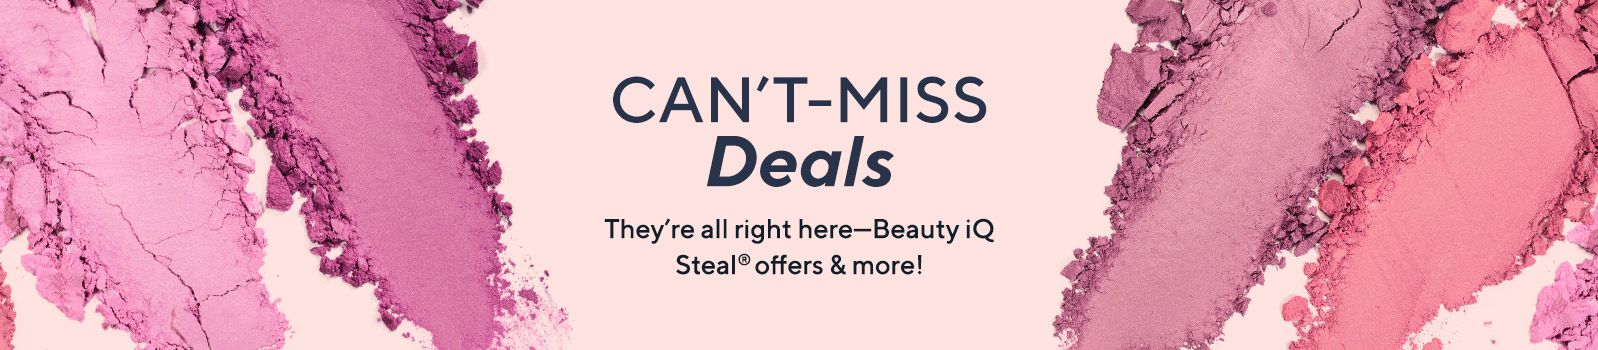 Can't-Miss Deals They're all right here—Beauty iQ Steal® offers & more!